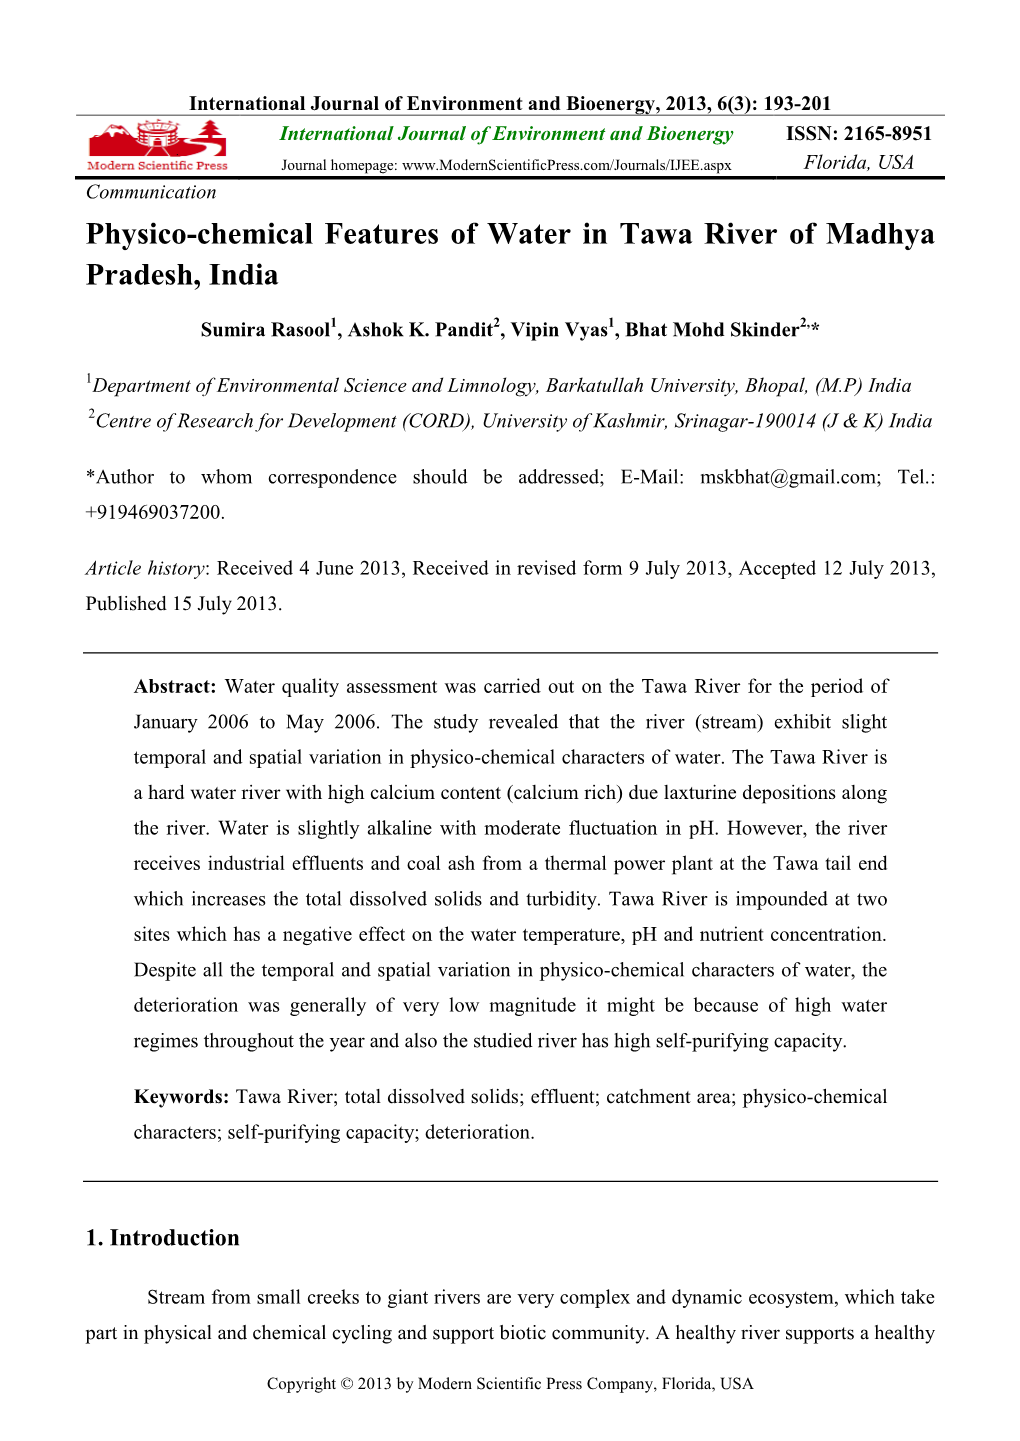 Physico-Chemical Features of Water in Tawa River of Madhya Pradesh, India